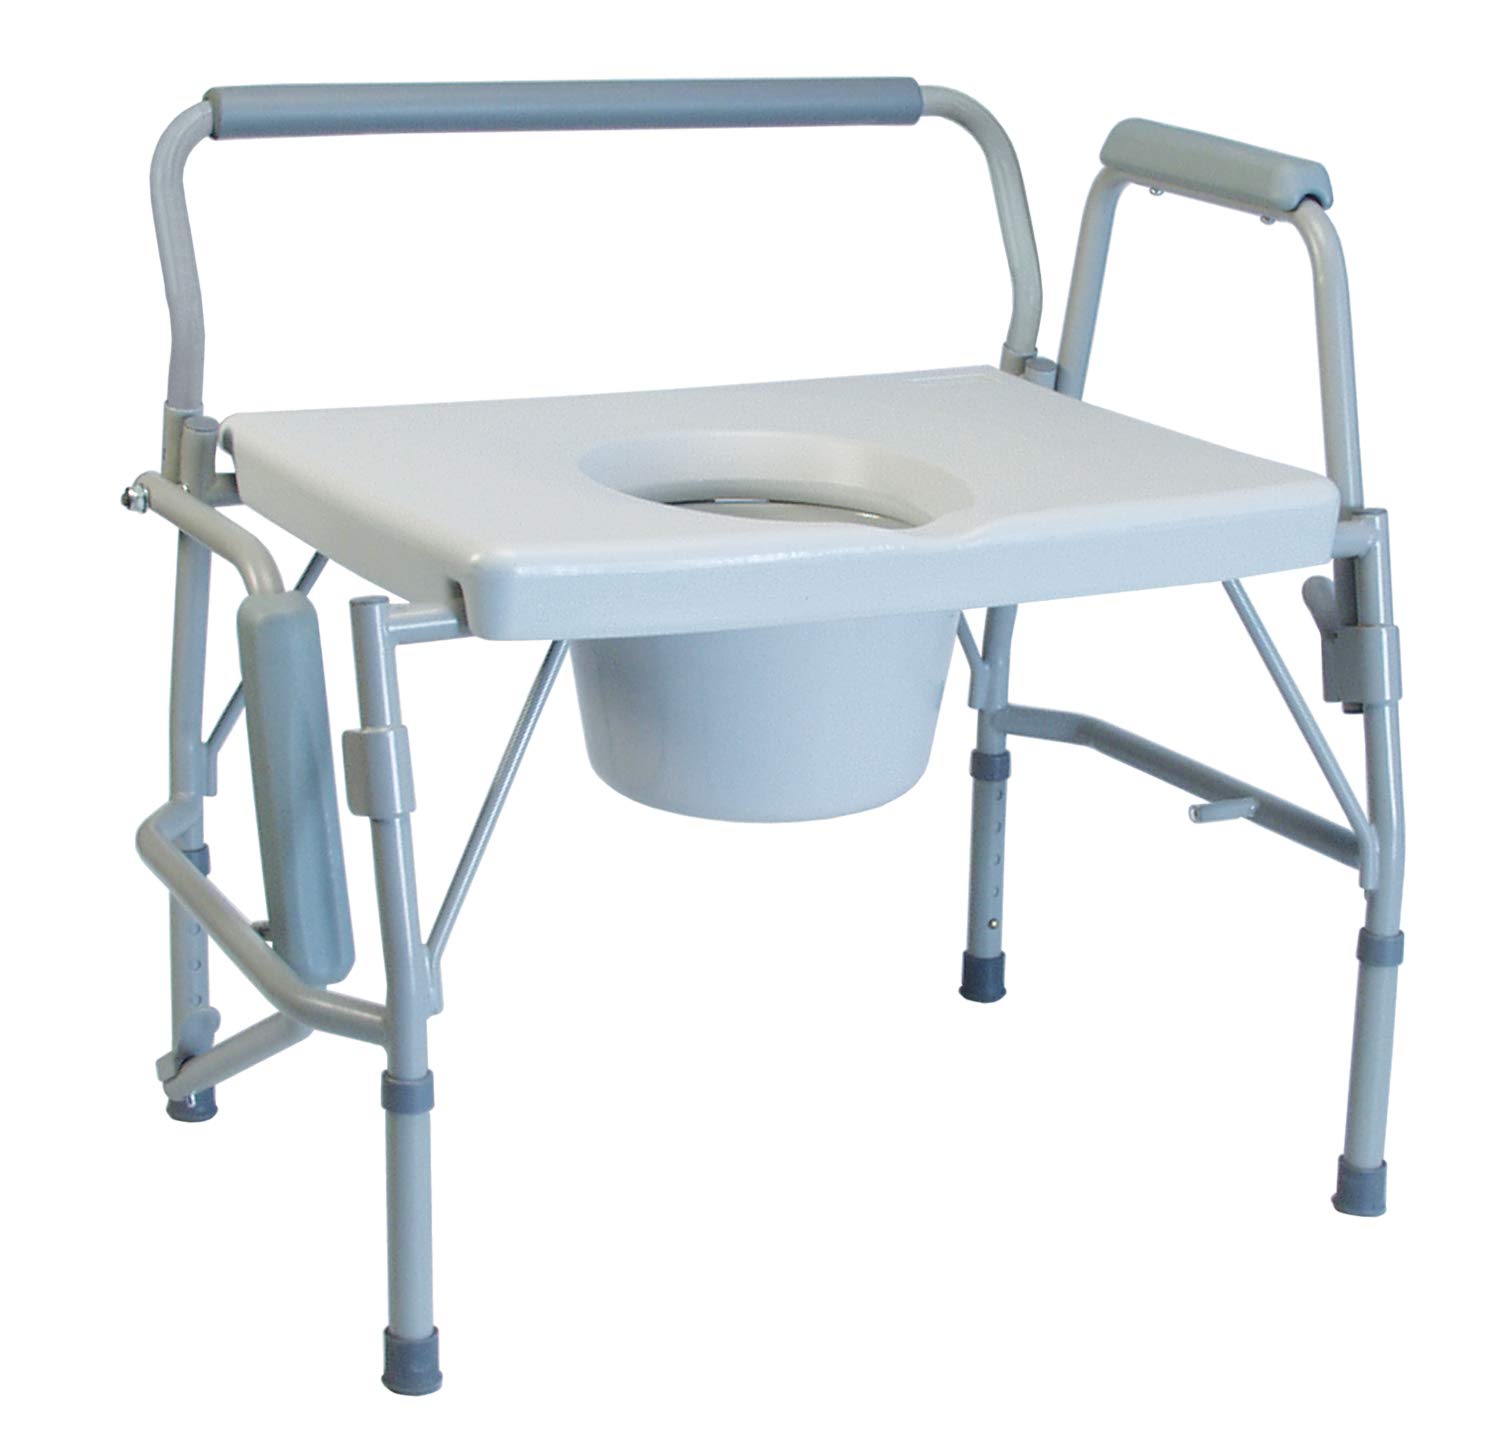 Lumex 3-in-1 Bariatric Bedside Commode Chair, Raised Toilet Seat, Toilet Safety Rails, Supports 600 lbs.